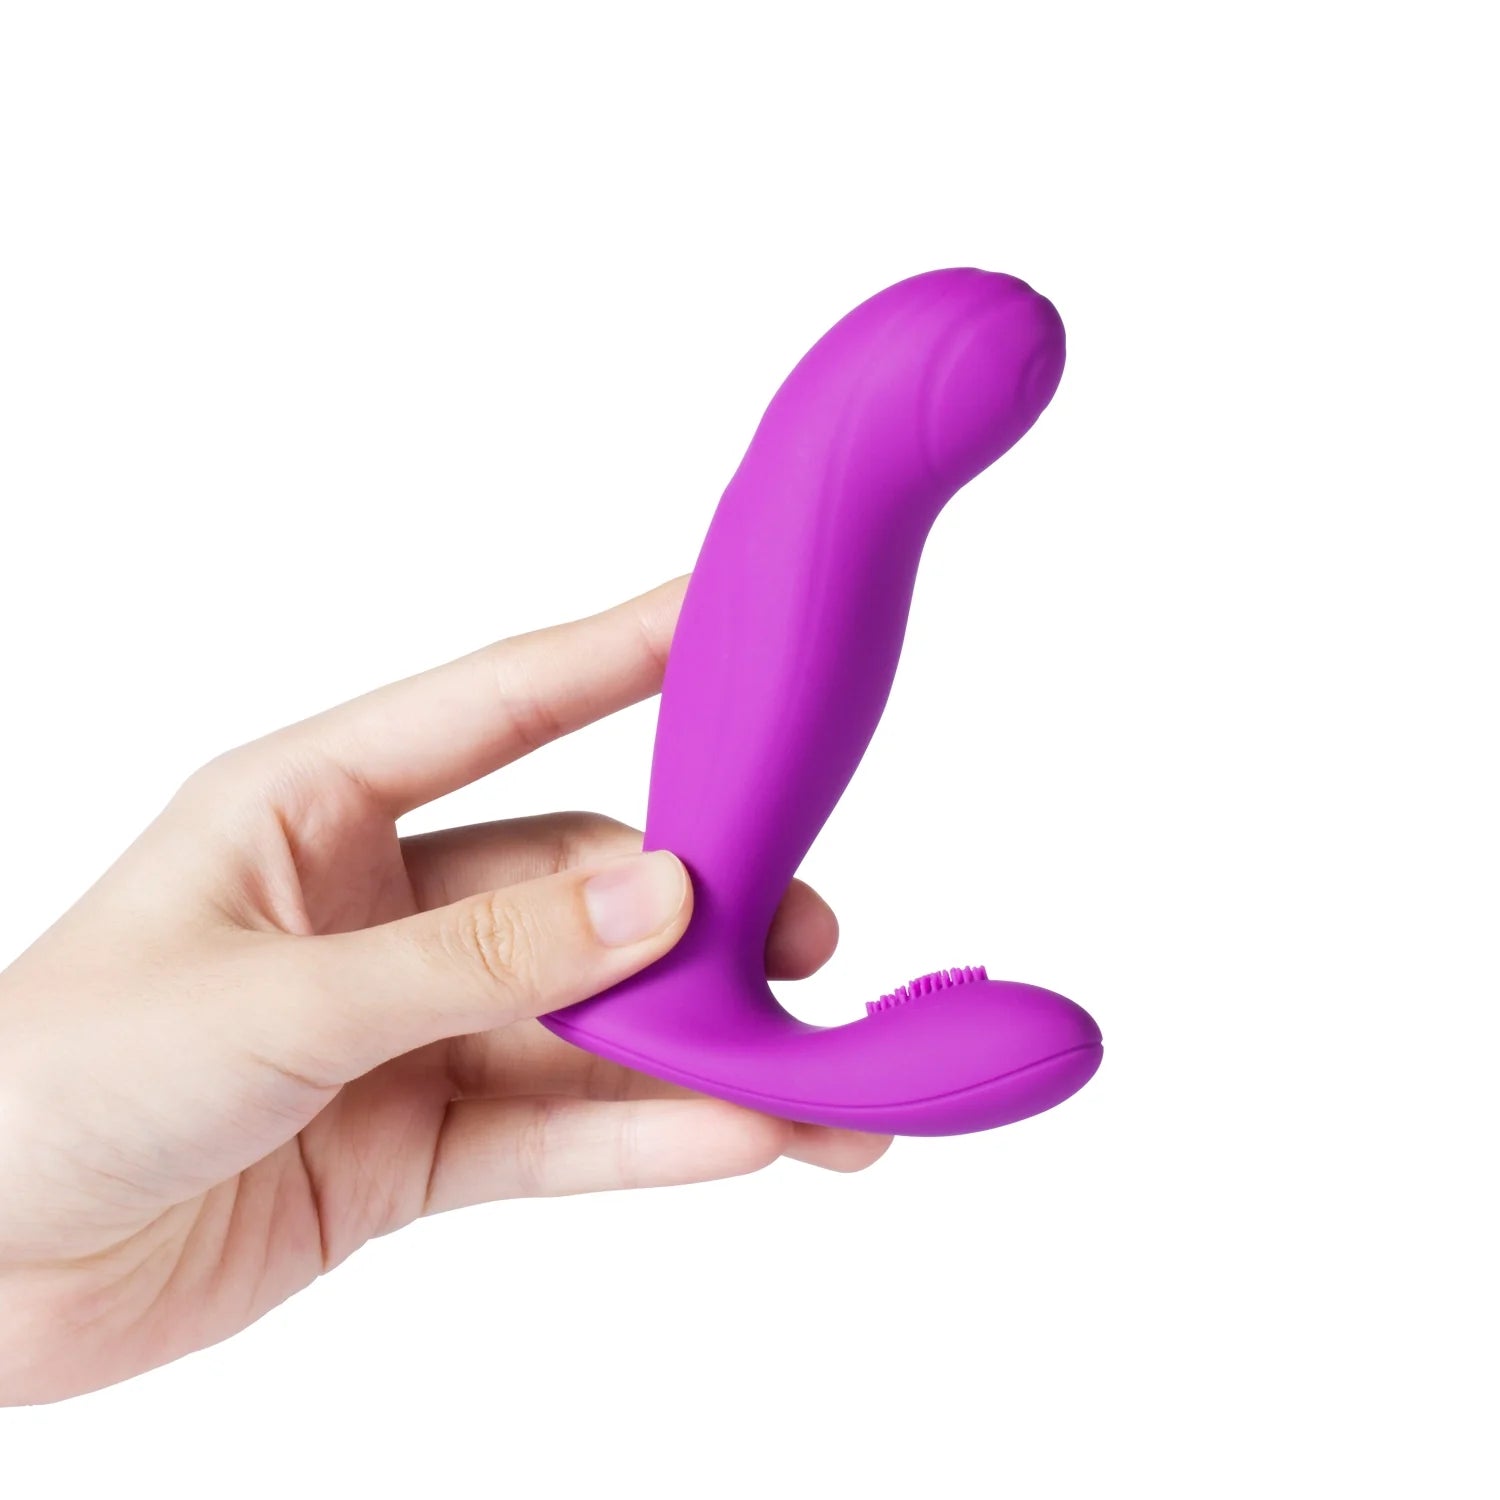 Allure G-Spot Vibrator with Clit Stimulator: Enhance Your Intimate Moments-BestGSpot